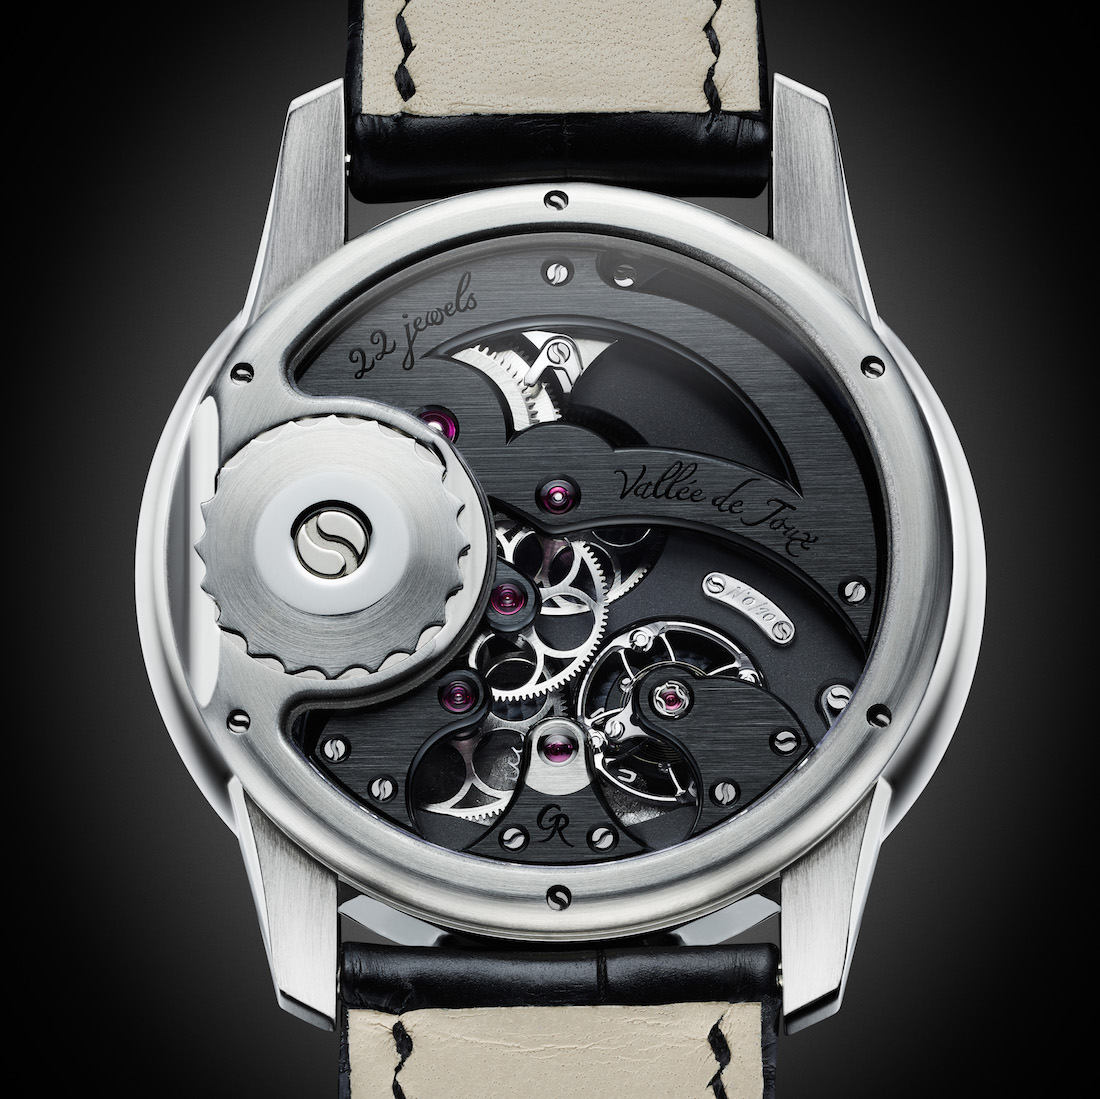 Romain-Gauthier-Prestige-HMS-Stainless-Steel-Watch-Movement-Close-Up